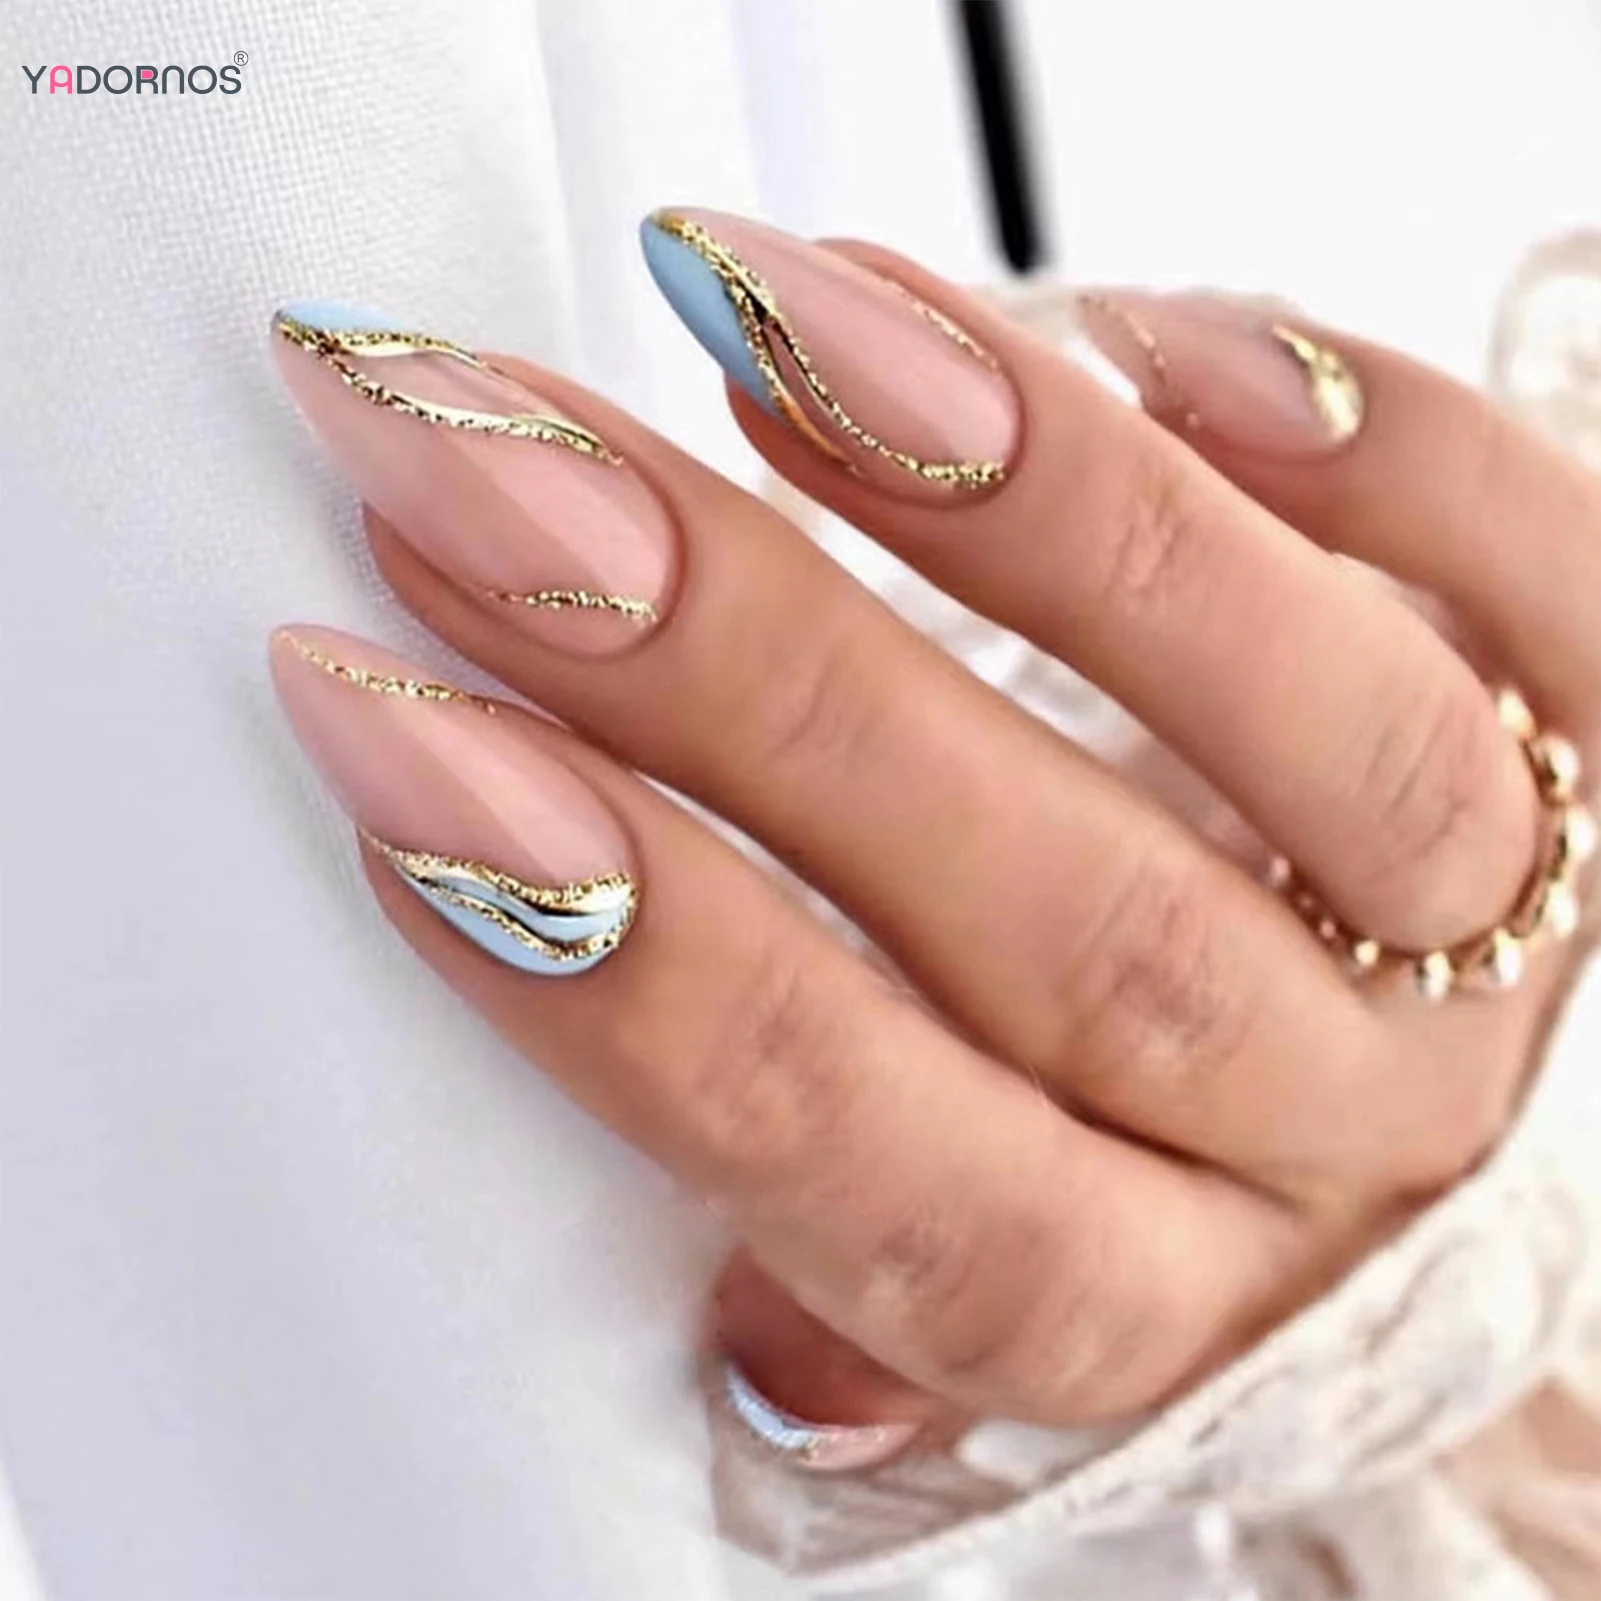 

24Pcs Long Stiletto False Nails with Designs Wearable Fake Nails Nude Color Press On Nails DIY Manicure Tips for Women Girls